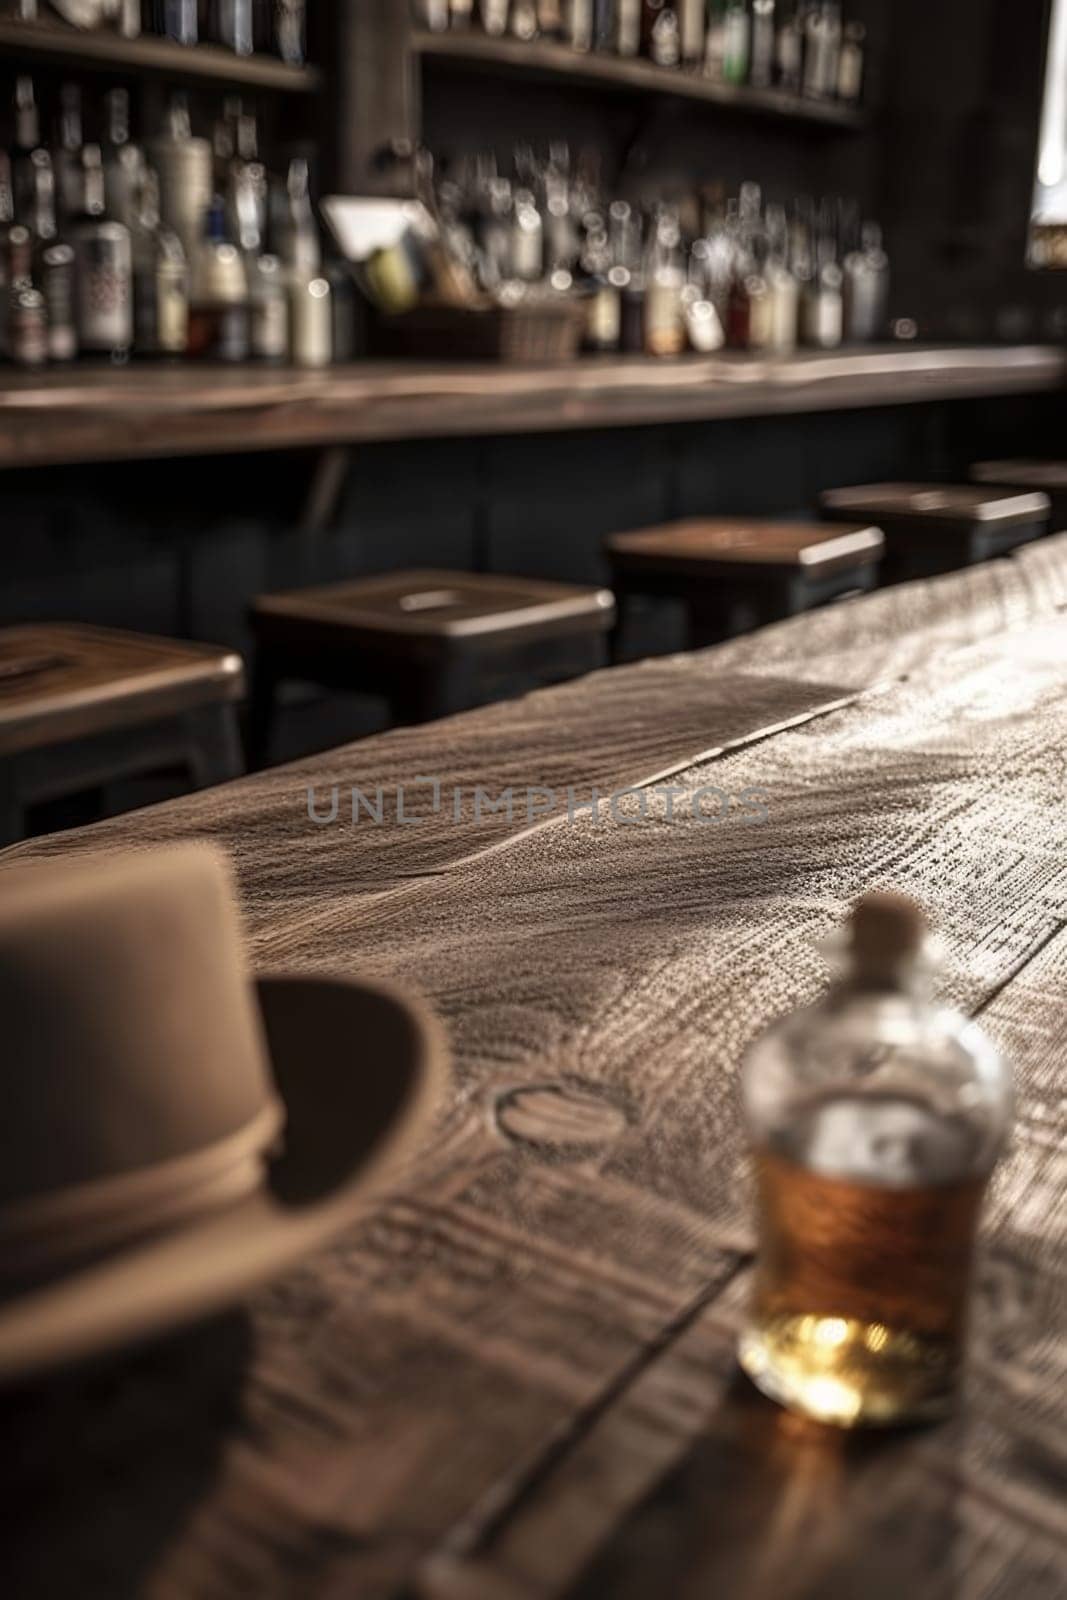 A whiskey glass rests on a wooden table, captured in a focused moment against a bokeh pub backdrop. The scene sets a contemplative mood, steeped in the character of a classic tavern